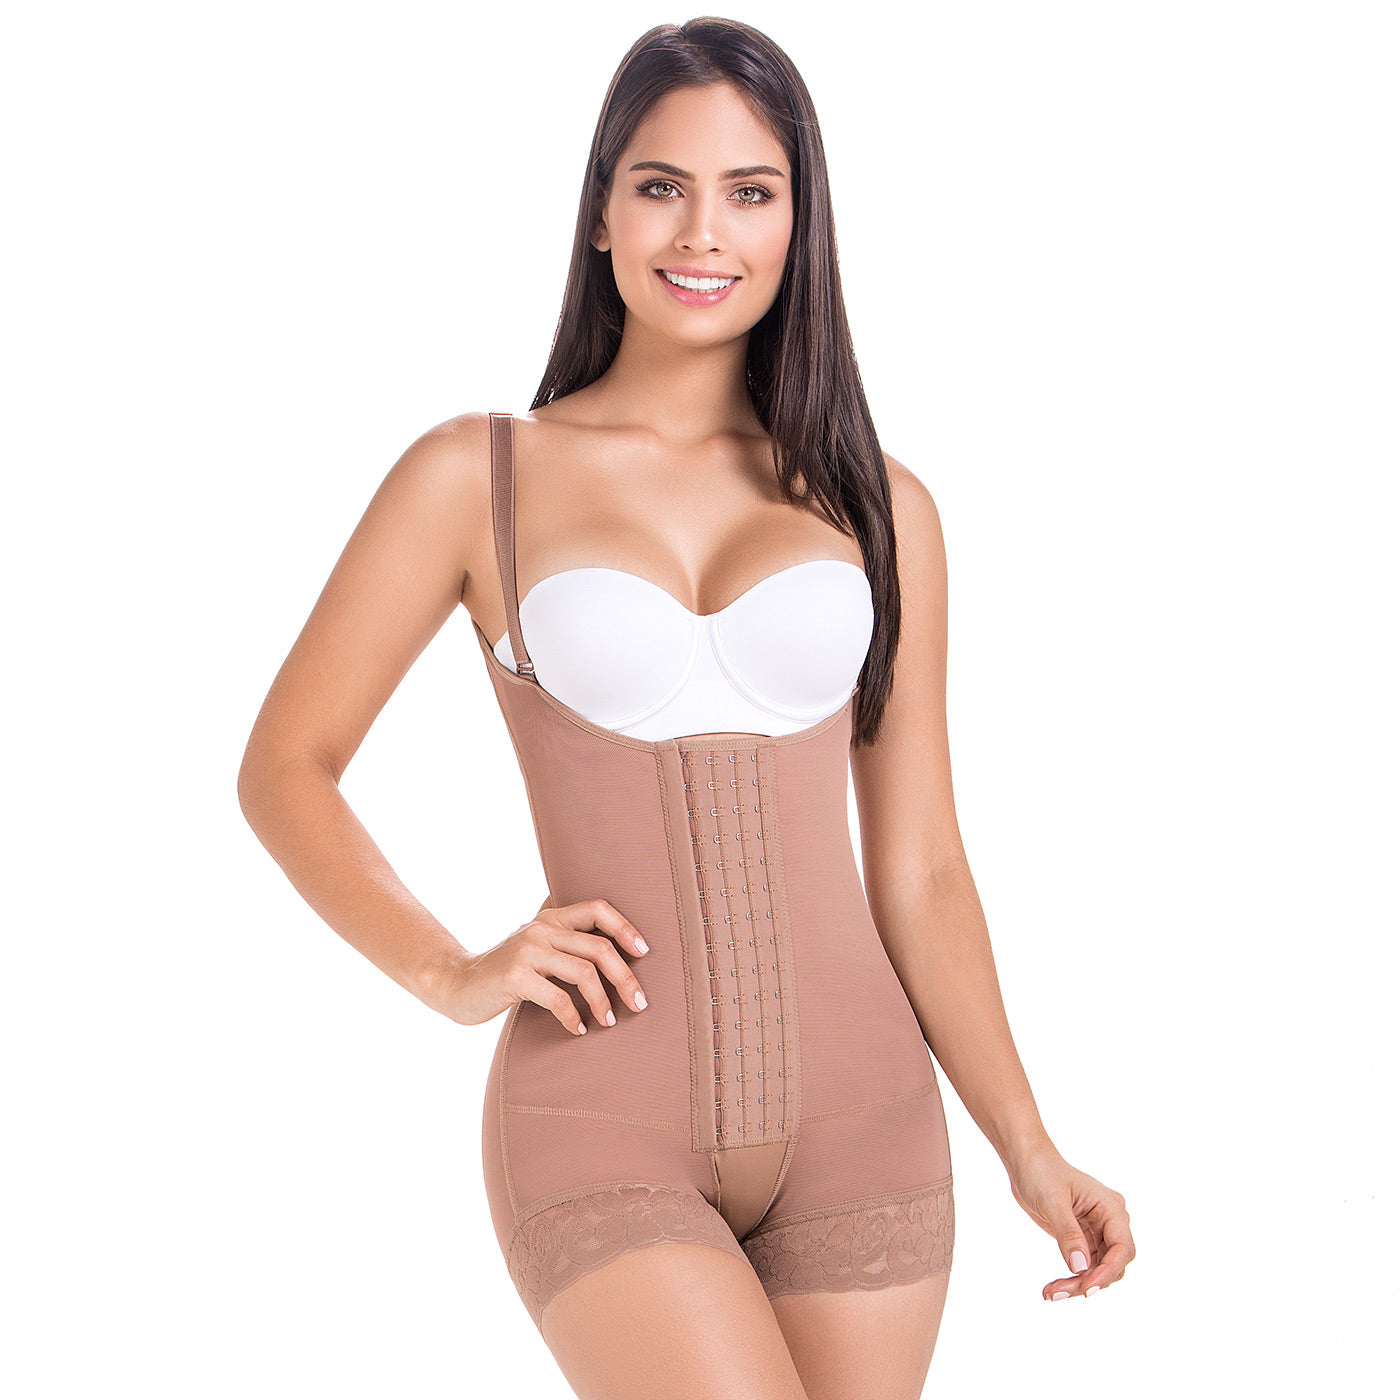 Fajas Colombianas Bella Mia, Long Leg Fajas Colombianas Reductoras Post  Surgical Body Shaper Girdles Ref 7002 (NUDE, XS) at  Women's Clothing  store